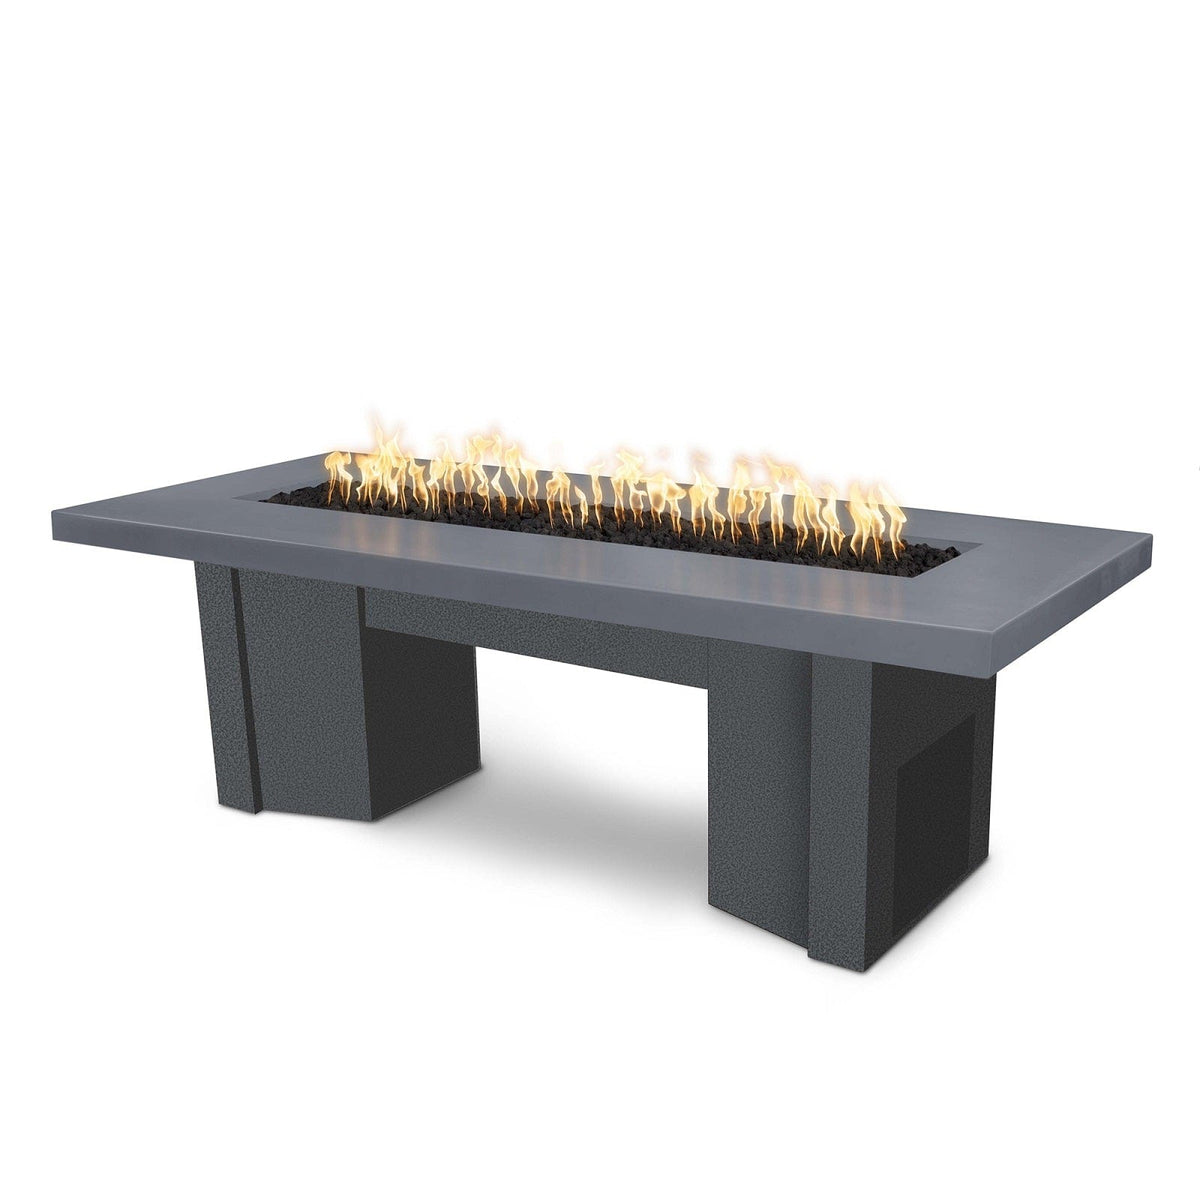 The Outdoor Plus Fire Features Gray (-GRY) / Silver Vein Powder Coated Steel (-SLV) The Outdoor Plus 78&quot; Alameda Fire Table Smooth Concrete in Liquid Propane - 110V Plug &amp; Play Electronic Ignition / OPT-ALMGFRC78EKIT-LP